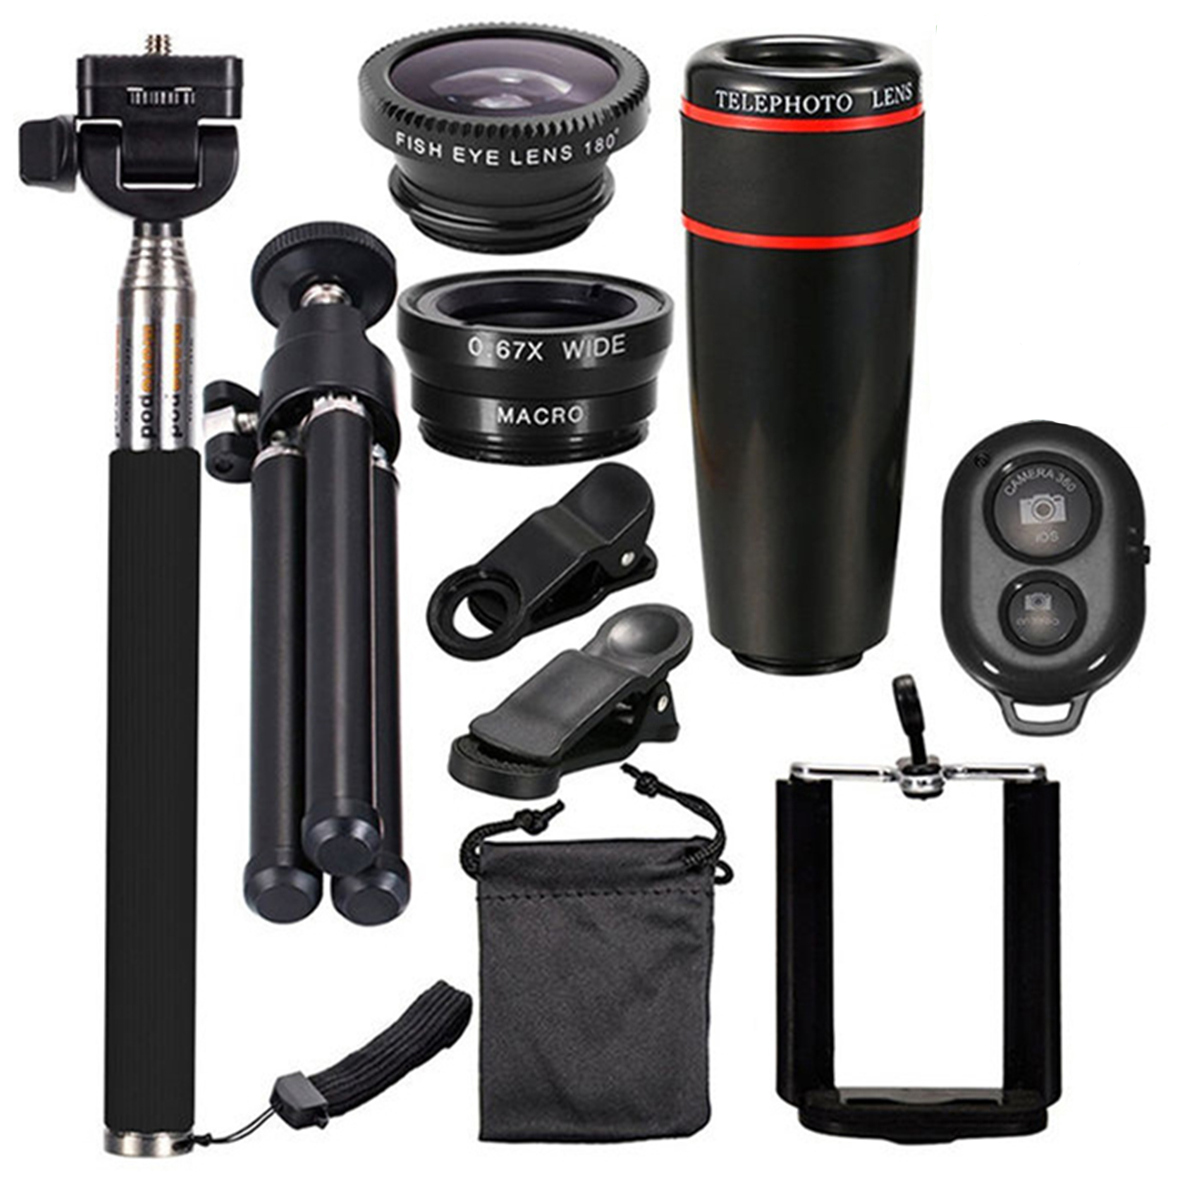 10-in-1 Universal Smartphone Camera Lens Fish Eye Lens with Clip Optical Telescope Kit Mobile selfie stick Bluetooth Set